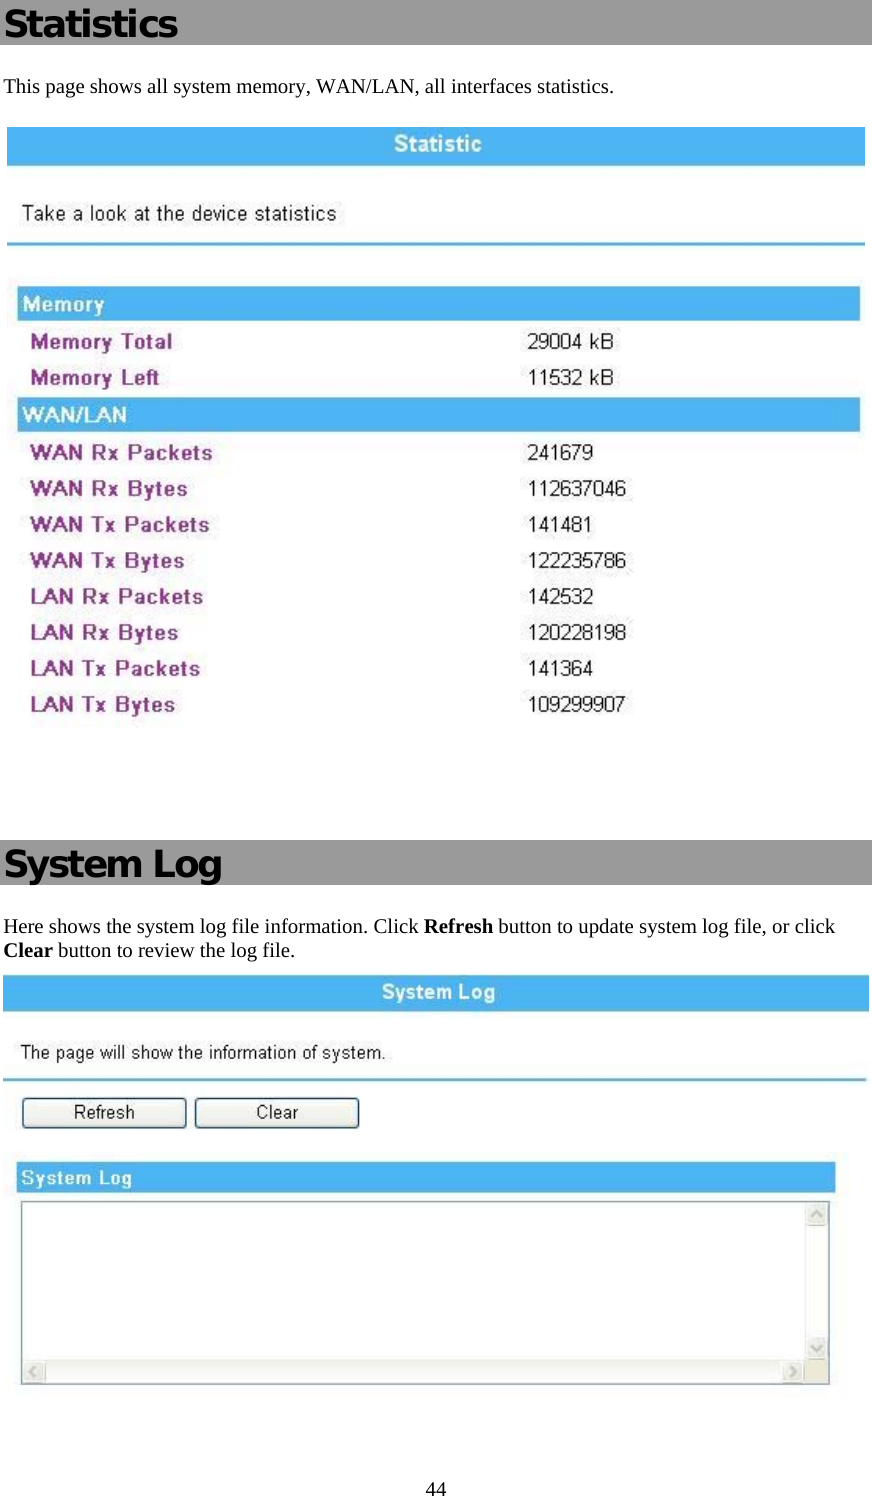   44Statistics This page shows all system memory, WAN/LAN, all interfaces statistics.    System Log Here shows the system log file information. Click Refresh button to update system log file, or click Clear button to review the log file.          